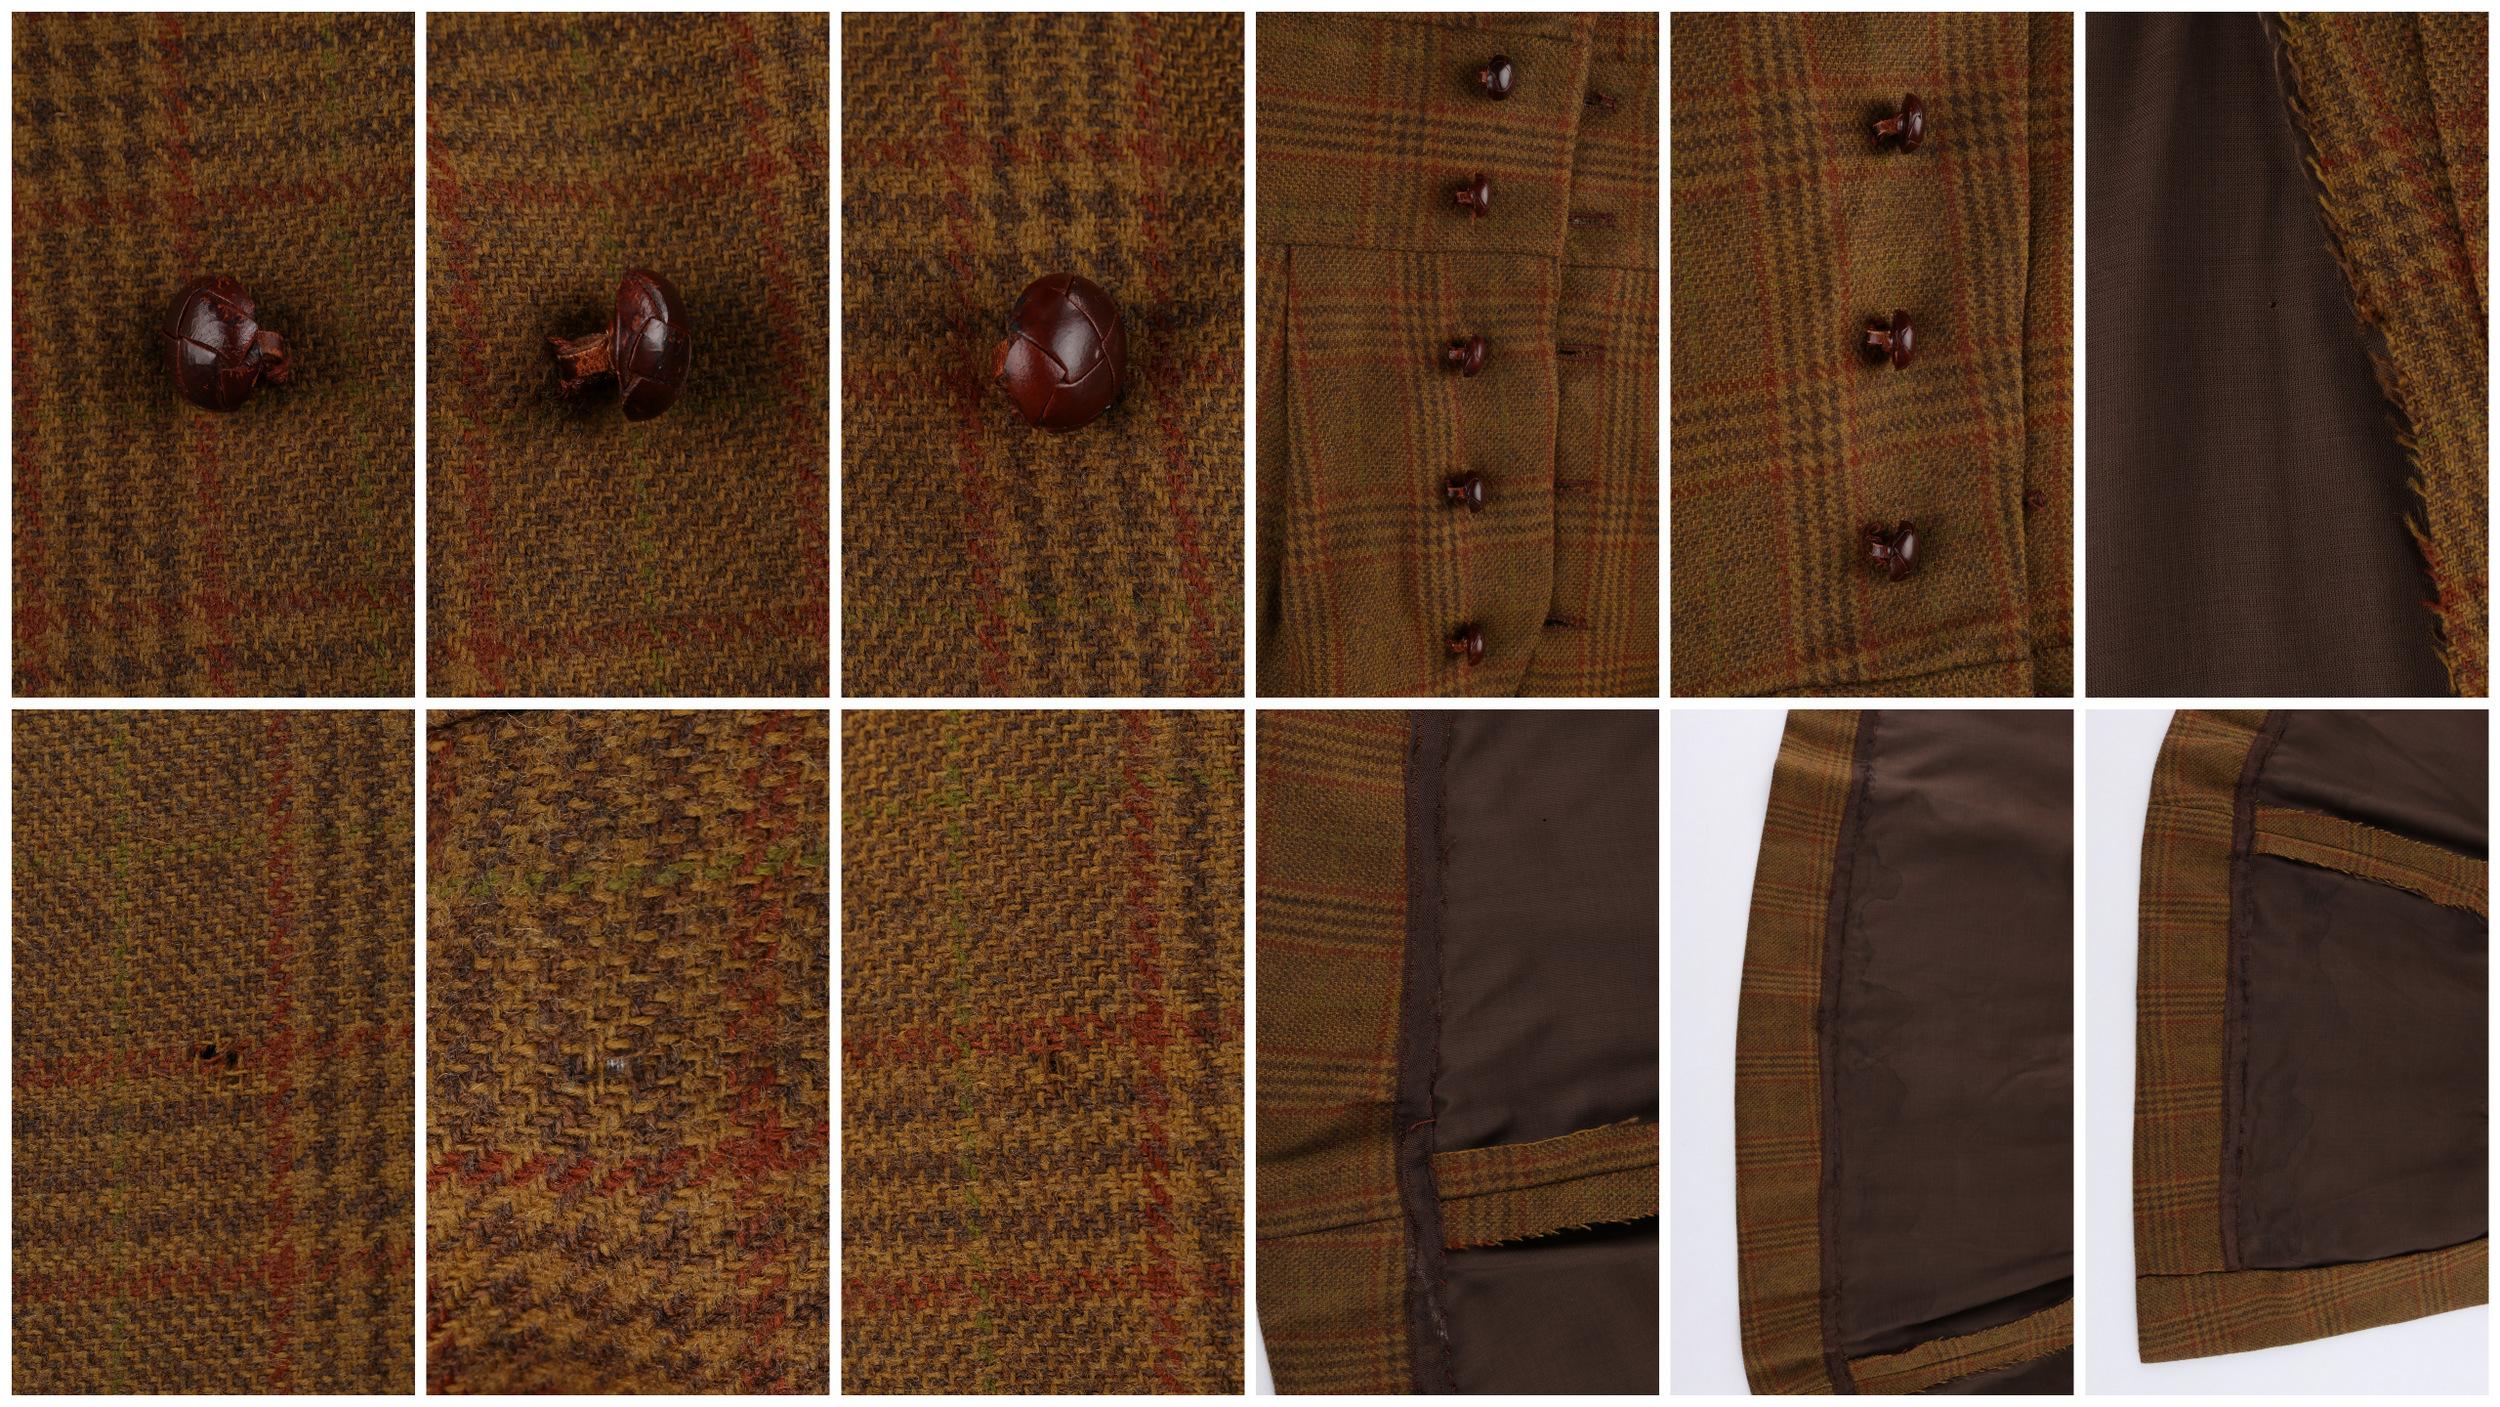 c.1930’s COUTURE 2 Pc Brown Wool Tweed Check Balloon Sleeve Jacket Pant Suit Set 5